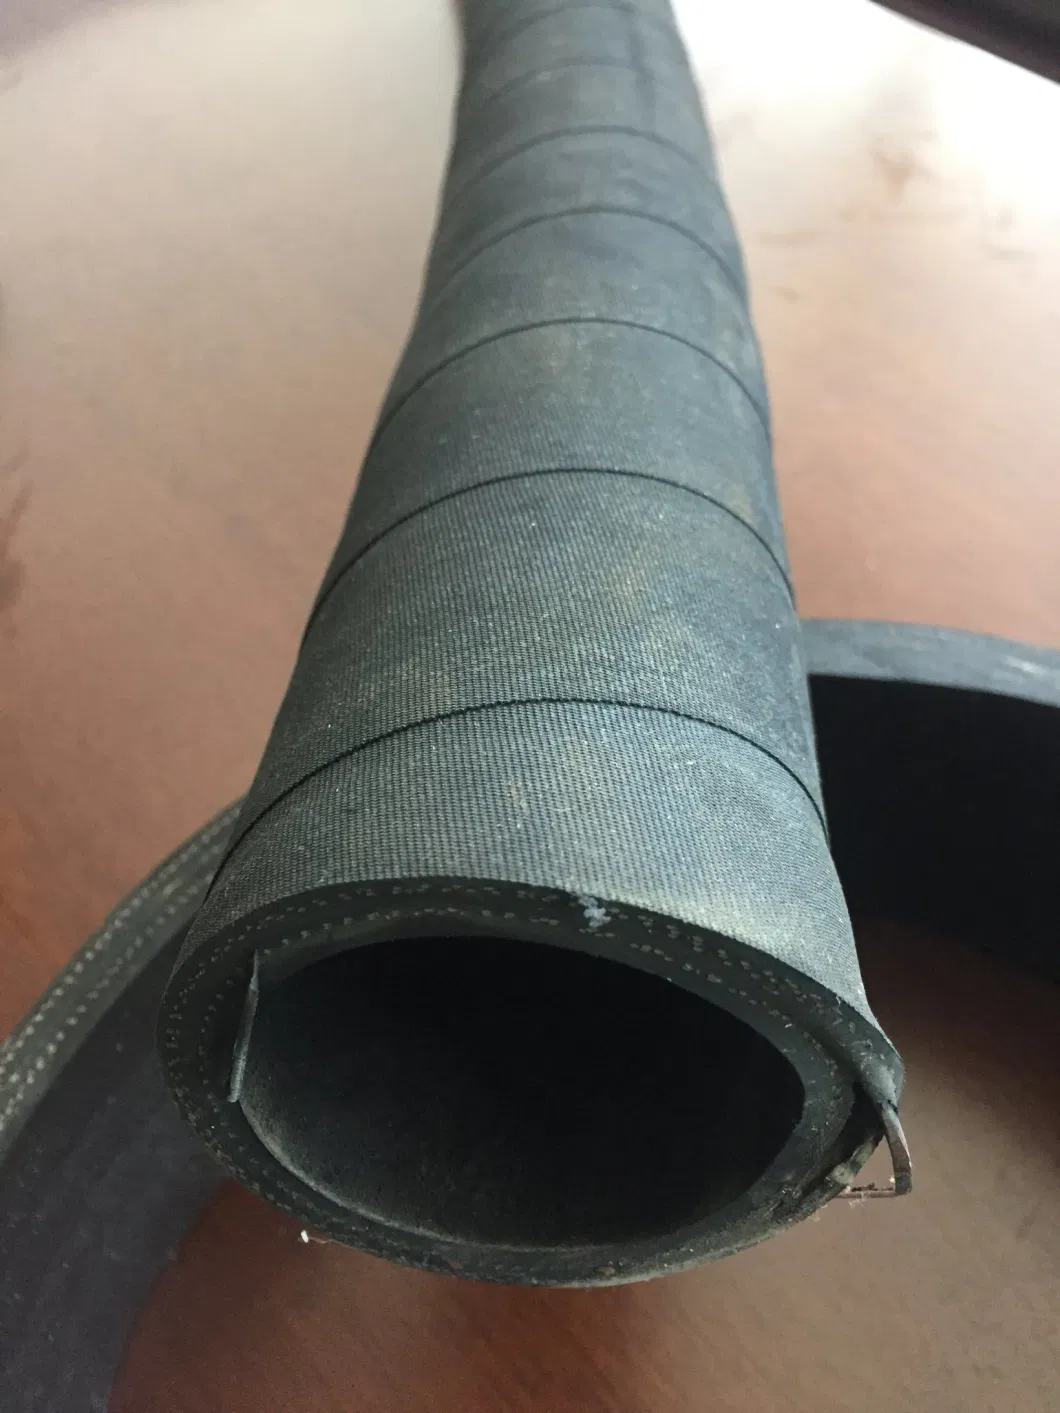 Industrial Rubber Water Suction &amp; Discharge Hose